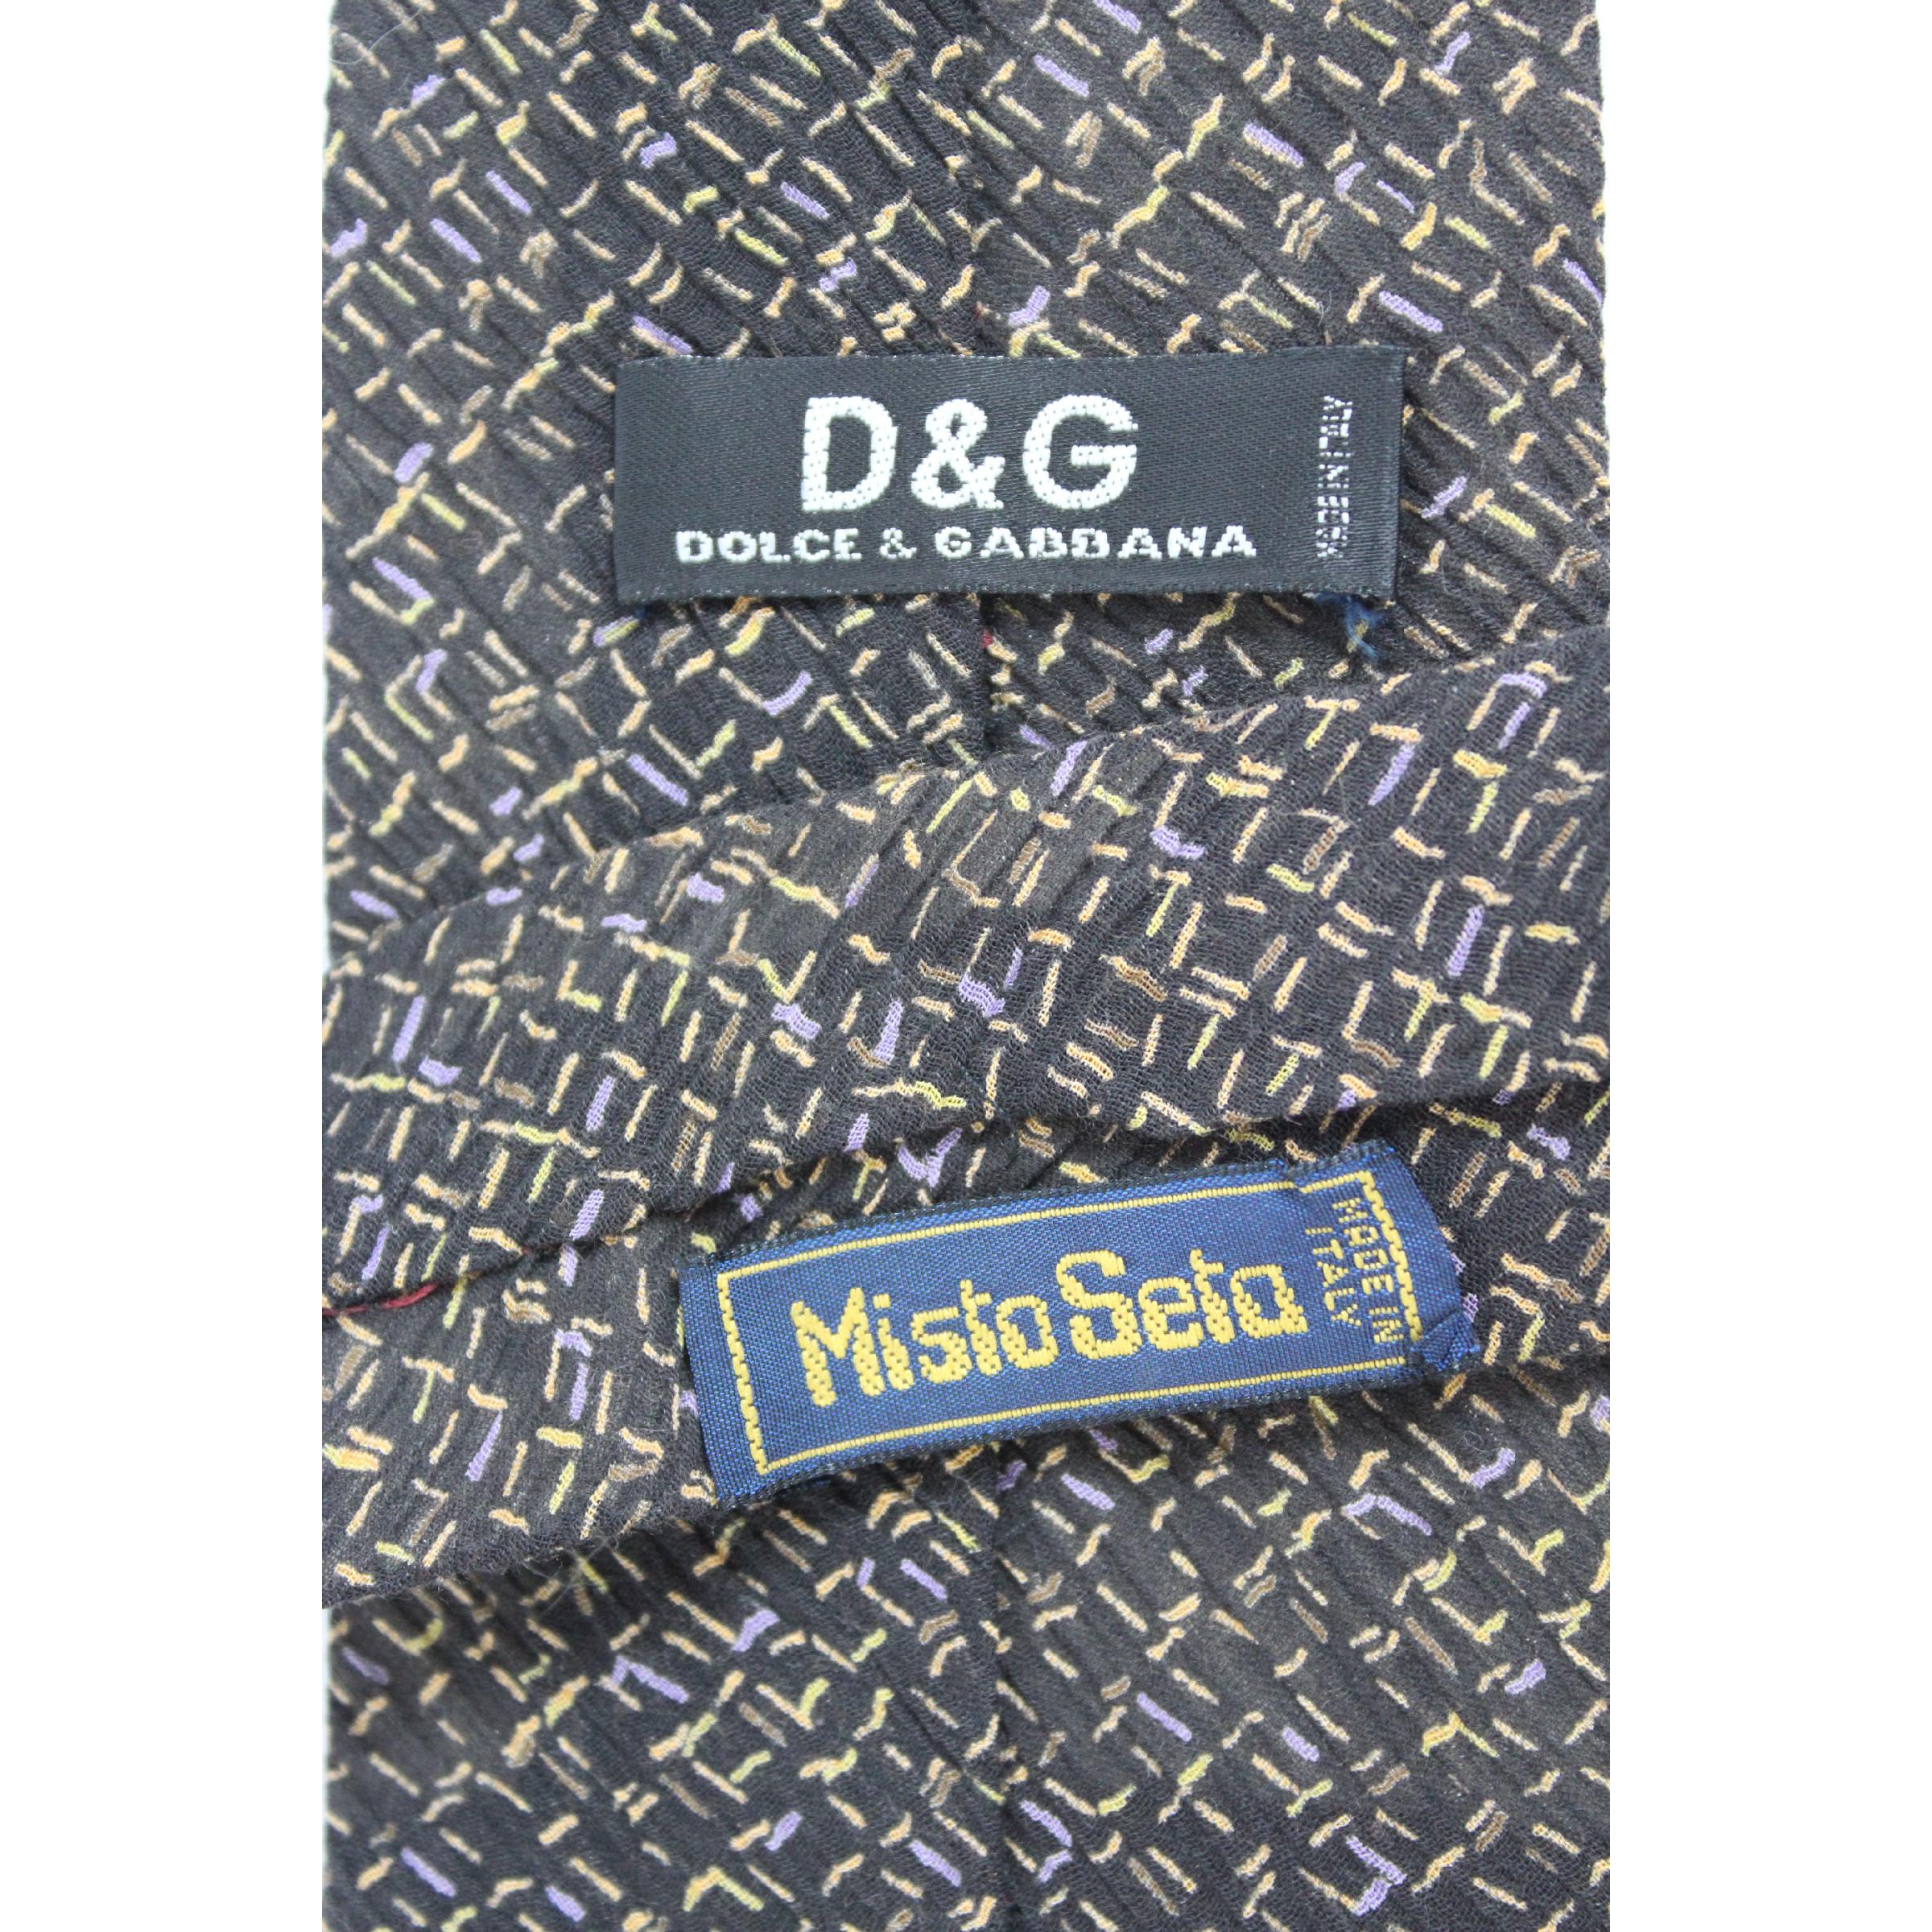 Dolce & Gabbana Silk Brown Classic Tie In Excellent Condition For Sale In Brindisi, Bt